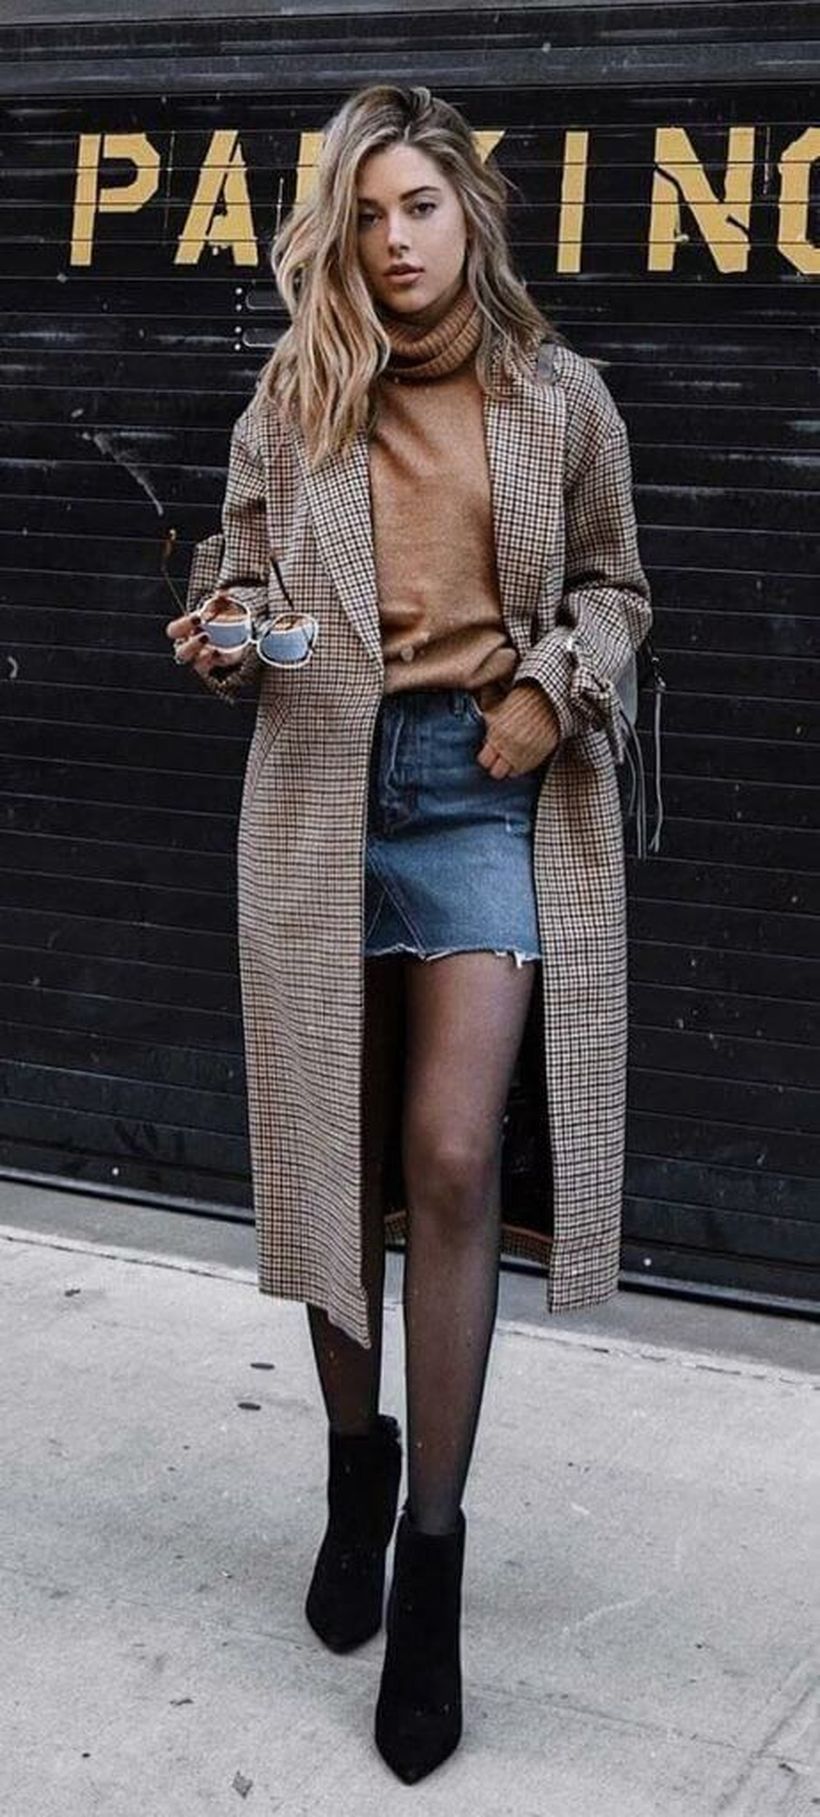 32 Charming Fall Street Style Outfits Inspiration to Make You Look Cool this Season - 32 Charming Fall Street Style Outfits Inspiration to Make You Look Cool this Season -   16 women style Autumn ideas